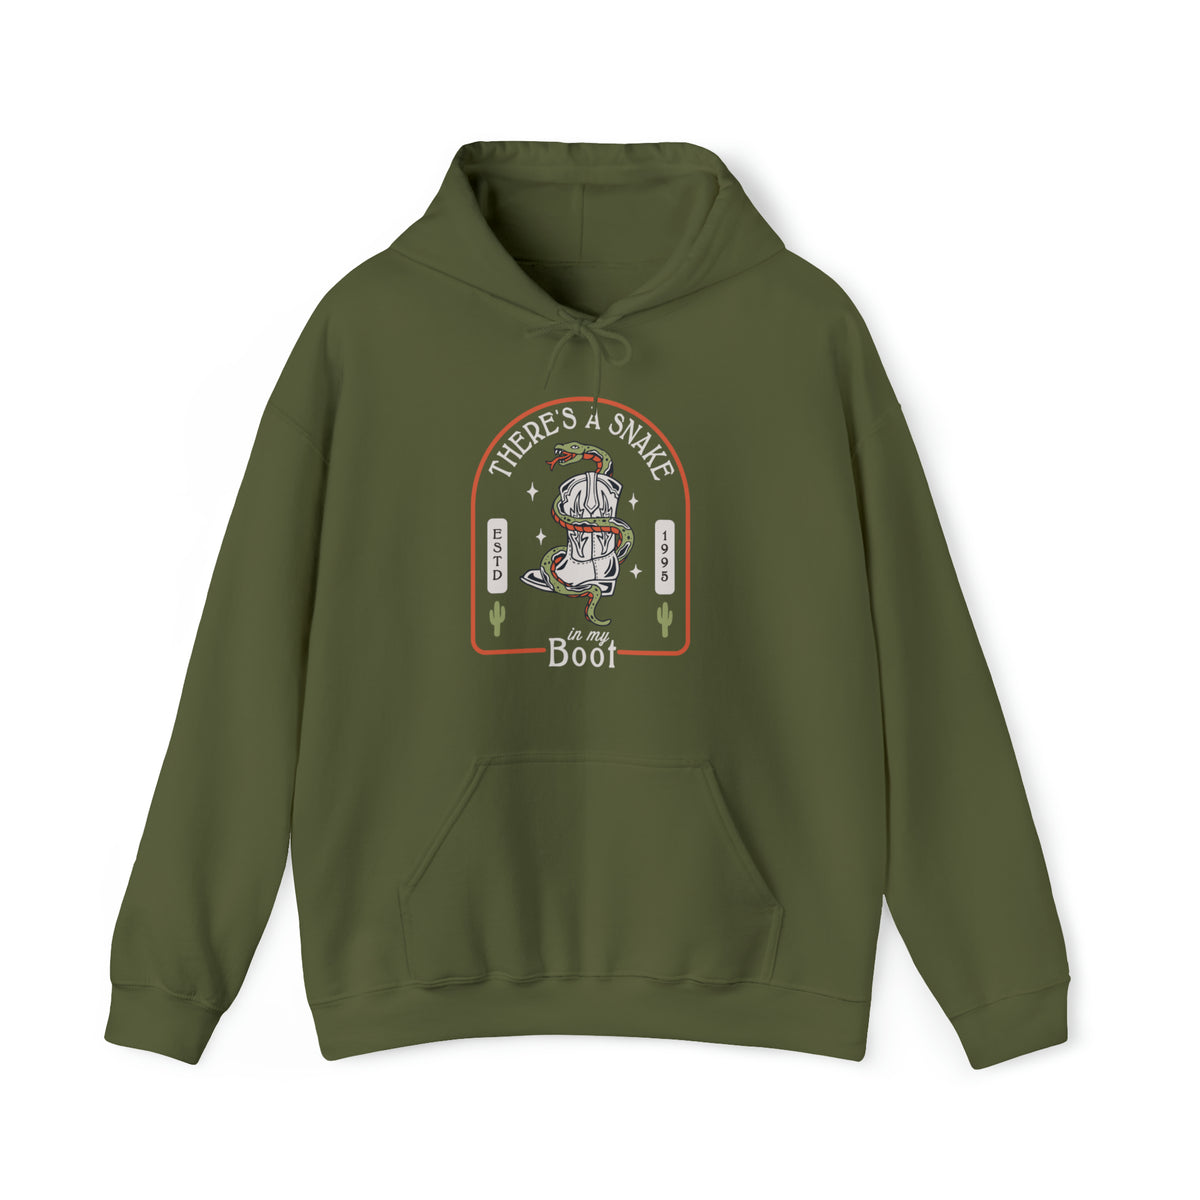 There's A Snake In My Boot Gildan Unisex Heavy Blend™ Hooded Sweatshirt